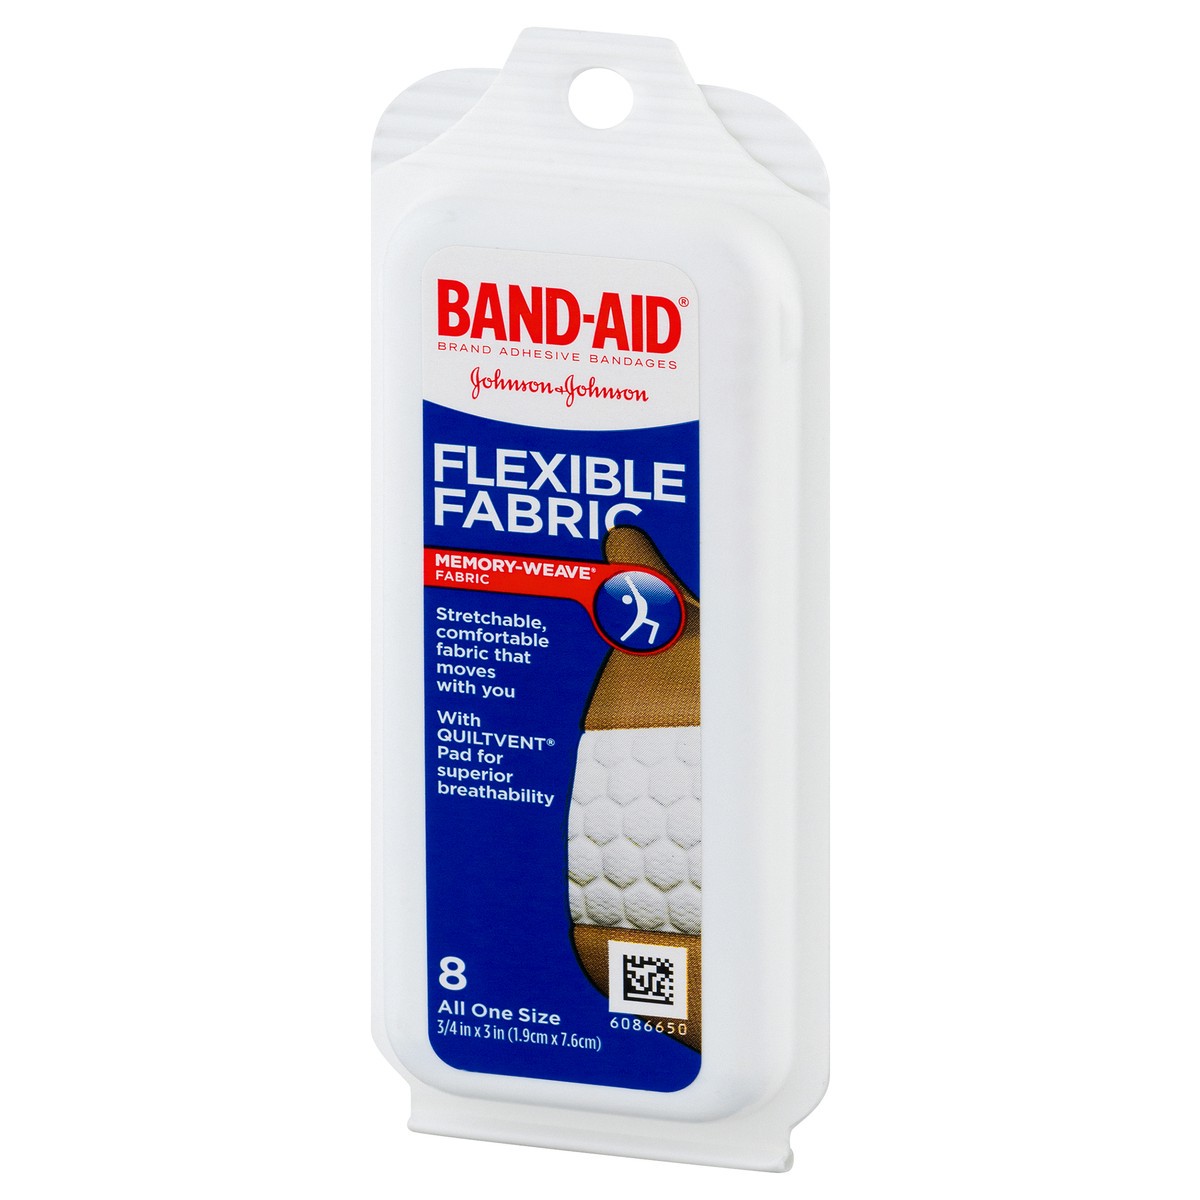 slide 2 of 7, BAND-AID Flexible Fabric Adhesive Bandages for Comfortable Flexible Protection & Wound Care of Minor Cuts & Scrapes, With Quilt-Aid Technology designed to Cushion Painful Wounds, All One Size, 8 ct, 8 ct